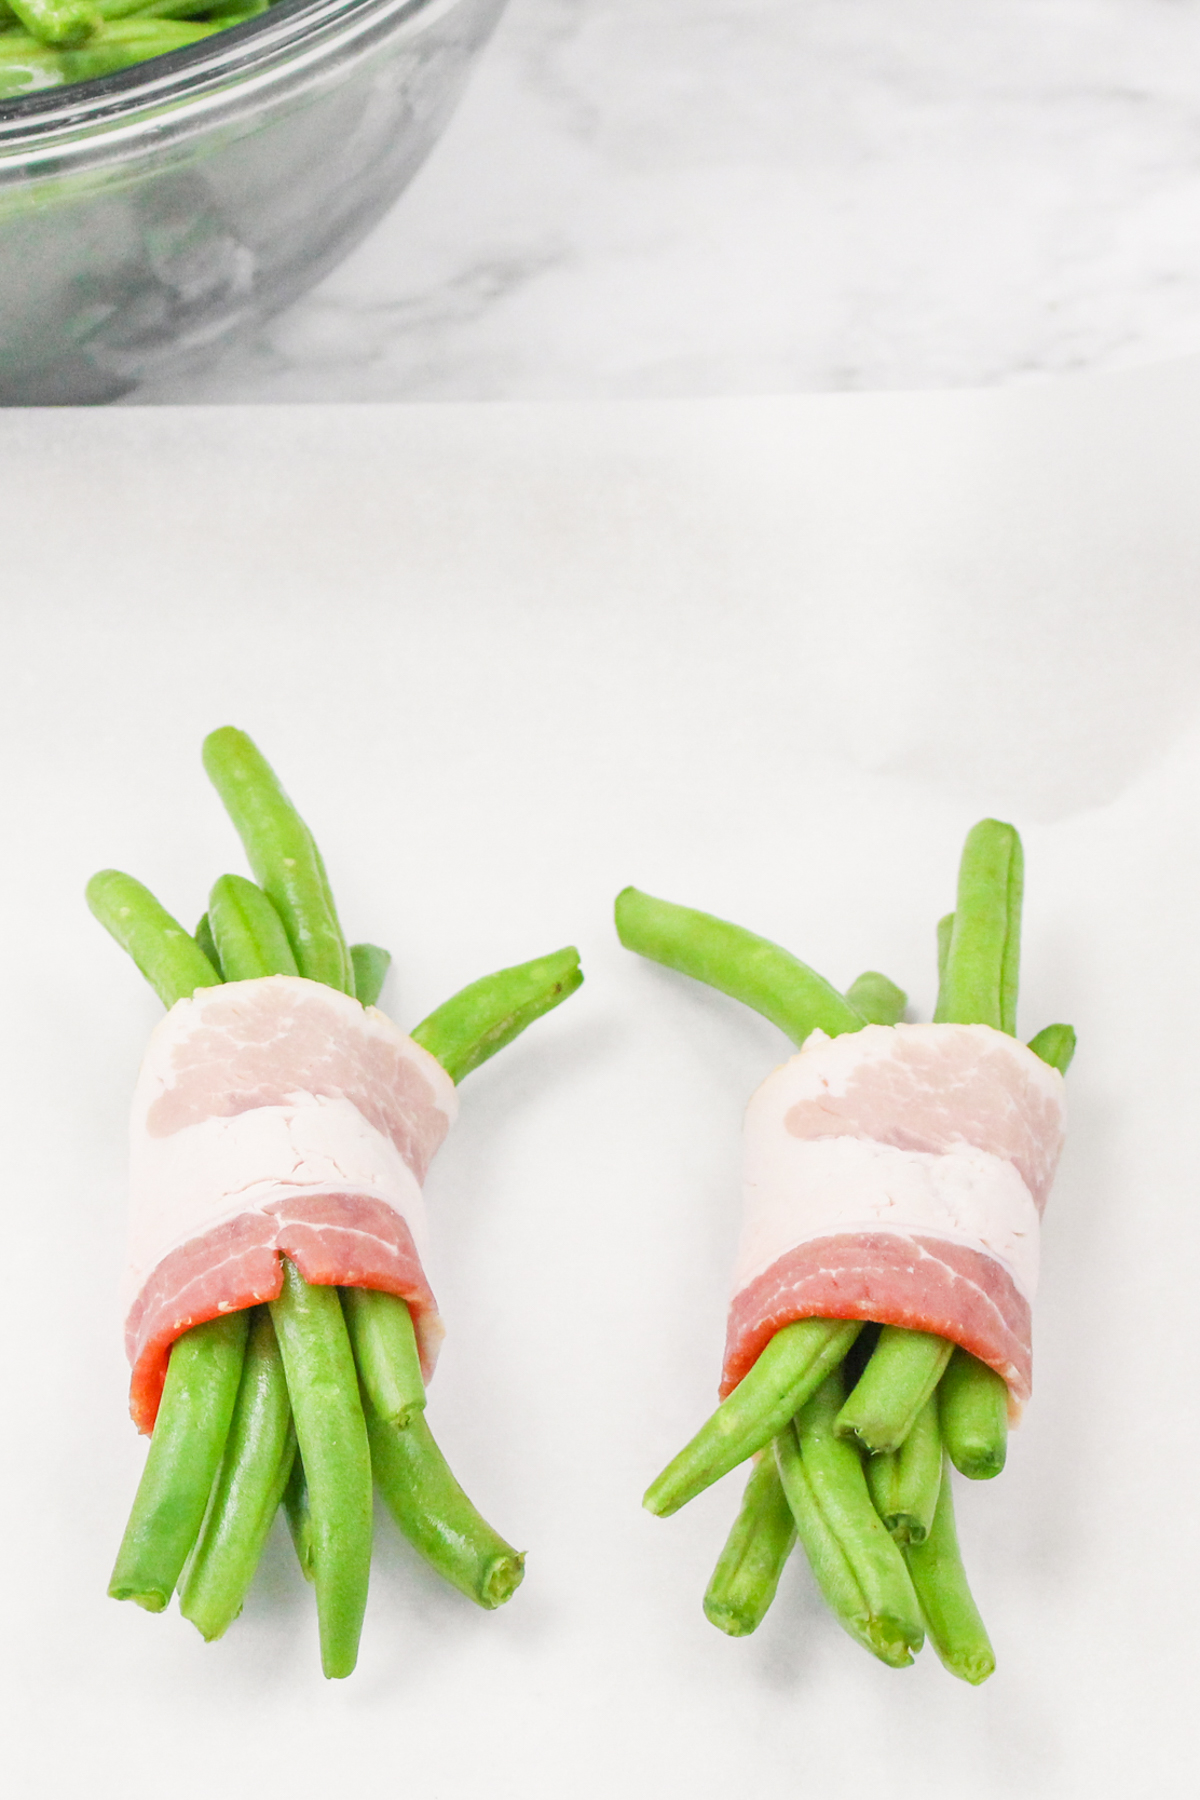 green beans wrapped in bacon